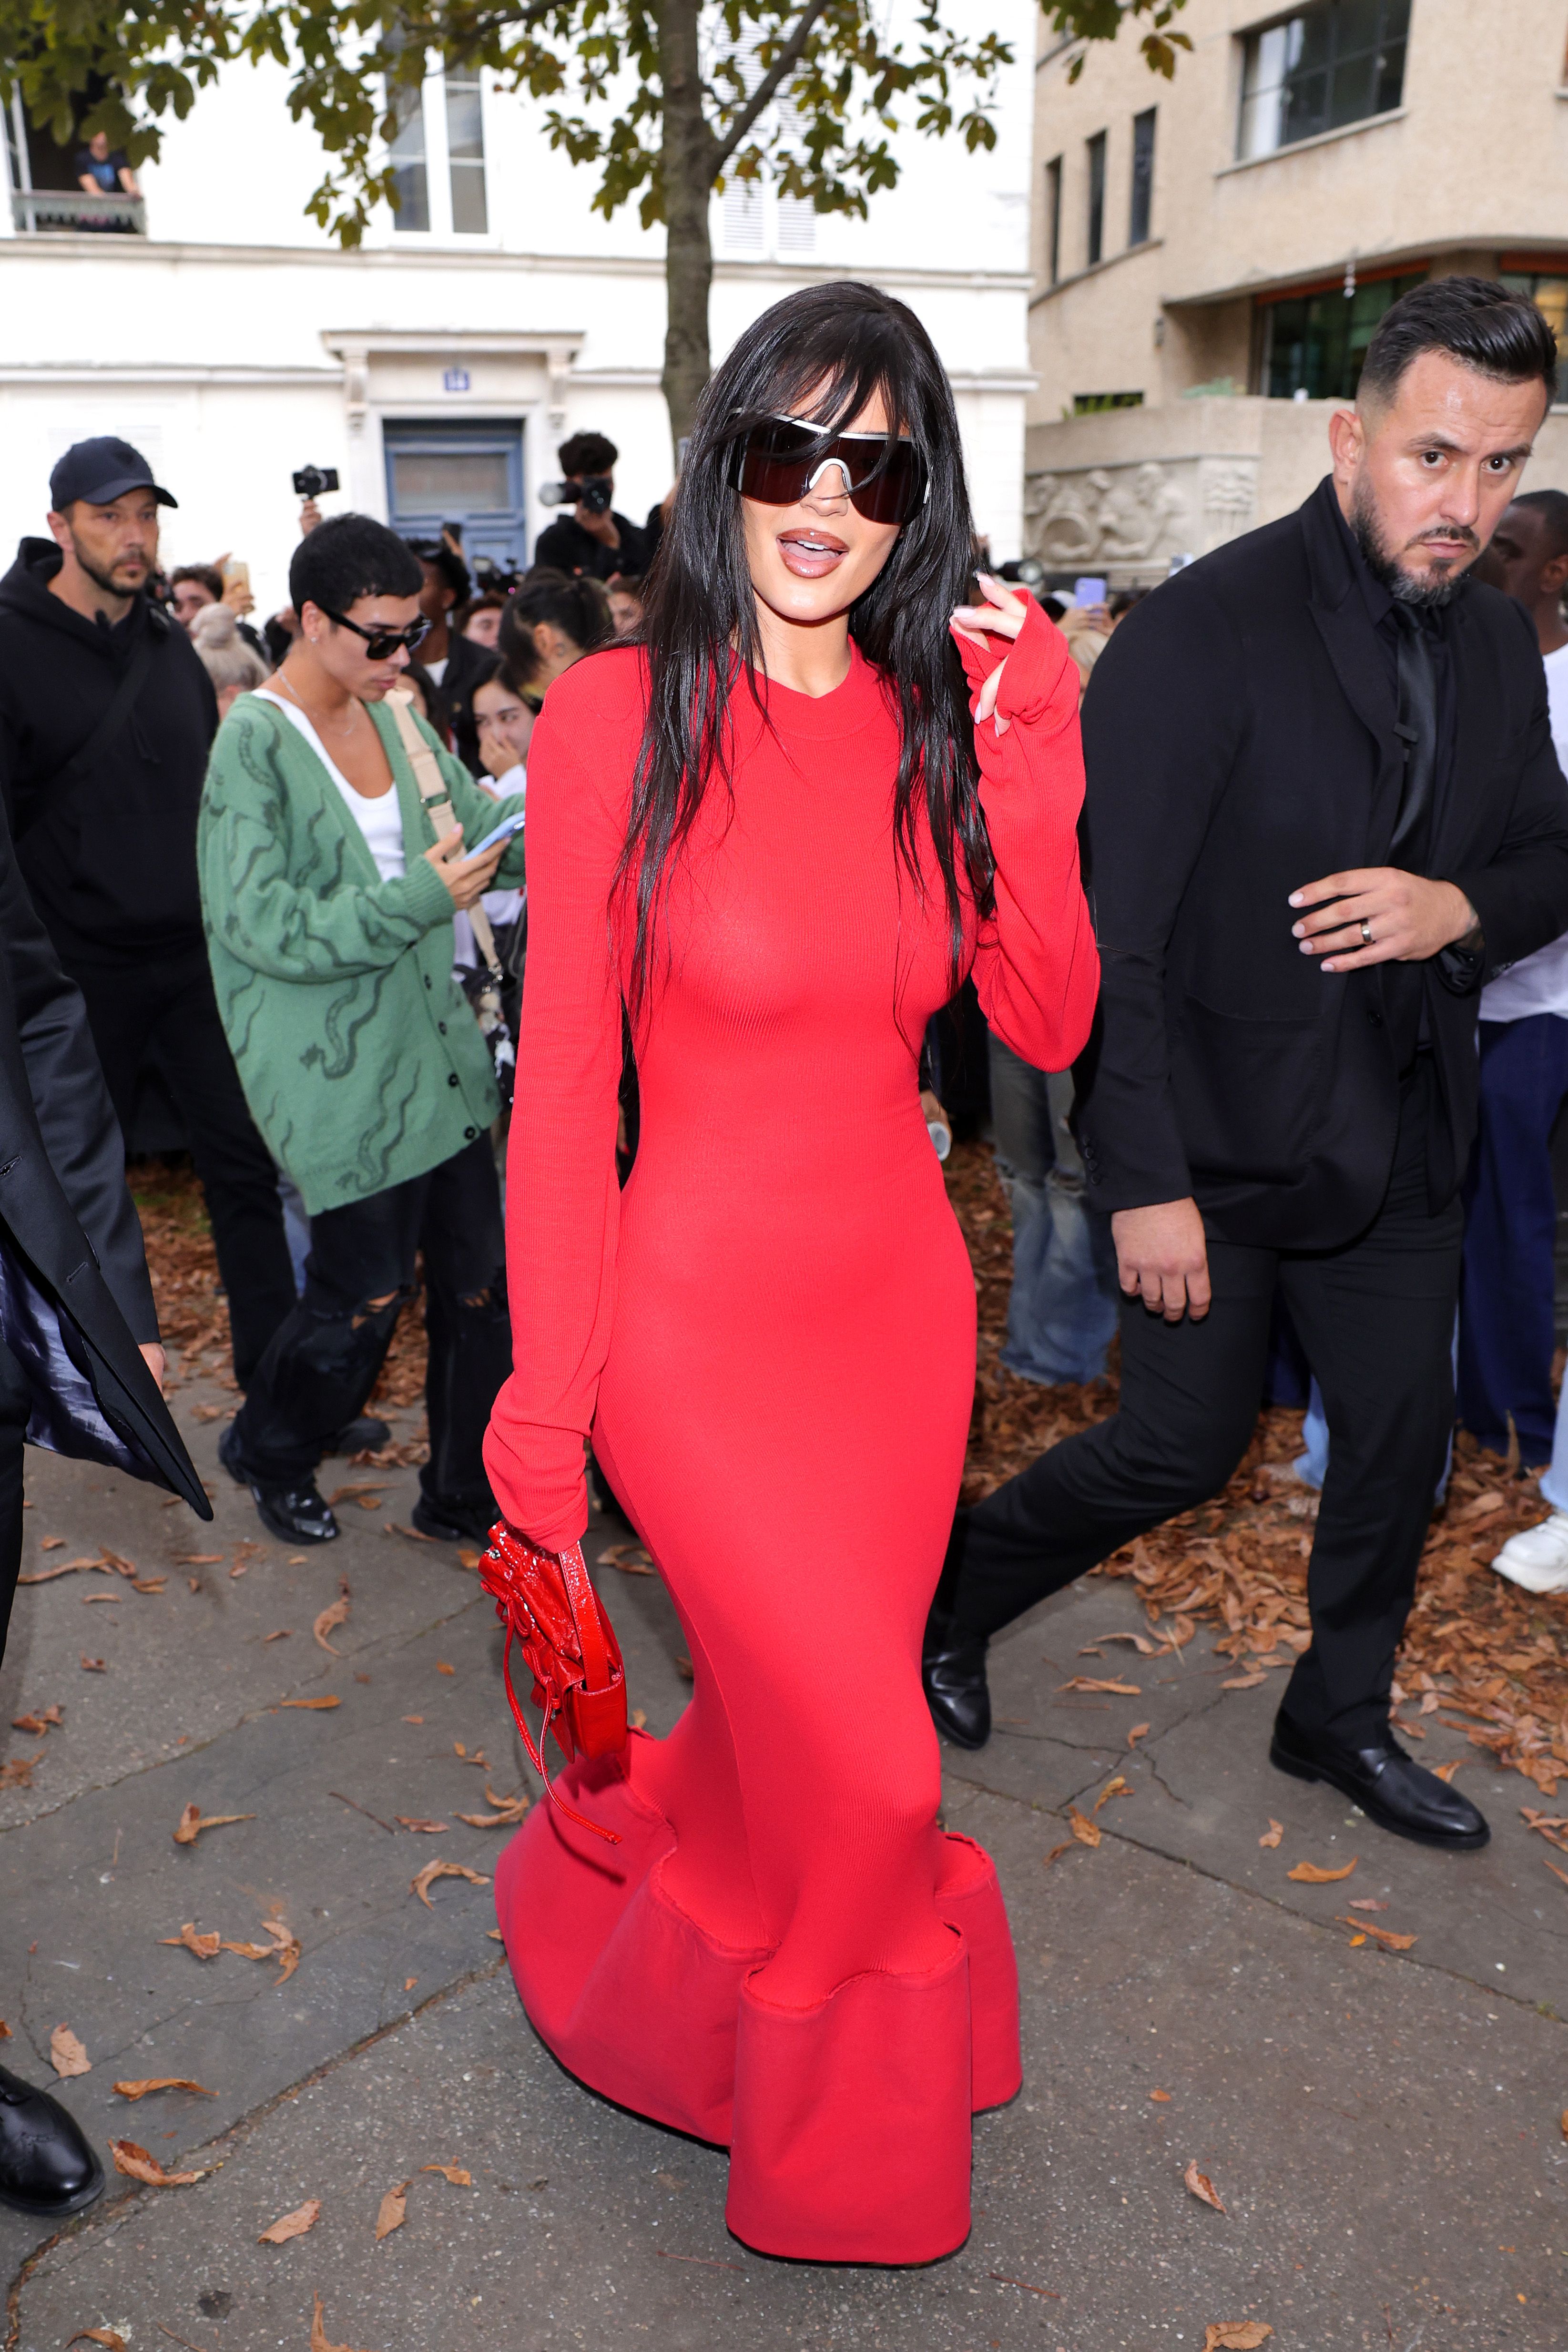 Kylie Jenner's Outfits In Paris Showcase Her Minimalist Side